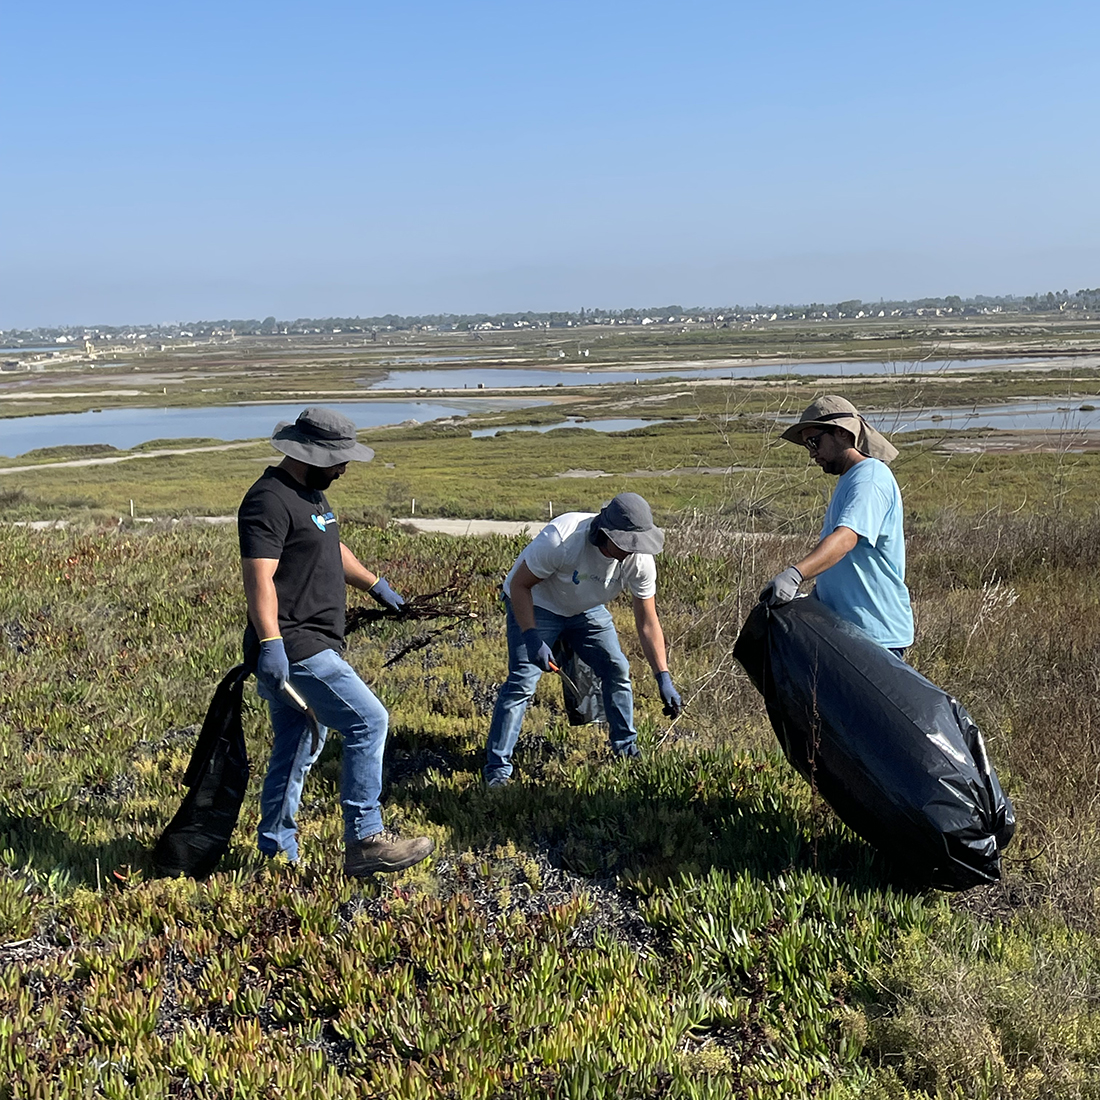 We are proud to work with our community to keep the Bolsa Chica Ecological Reserve healthy and thriving. Thank you to California Resources for helping us remove invasive plants from their work area!